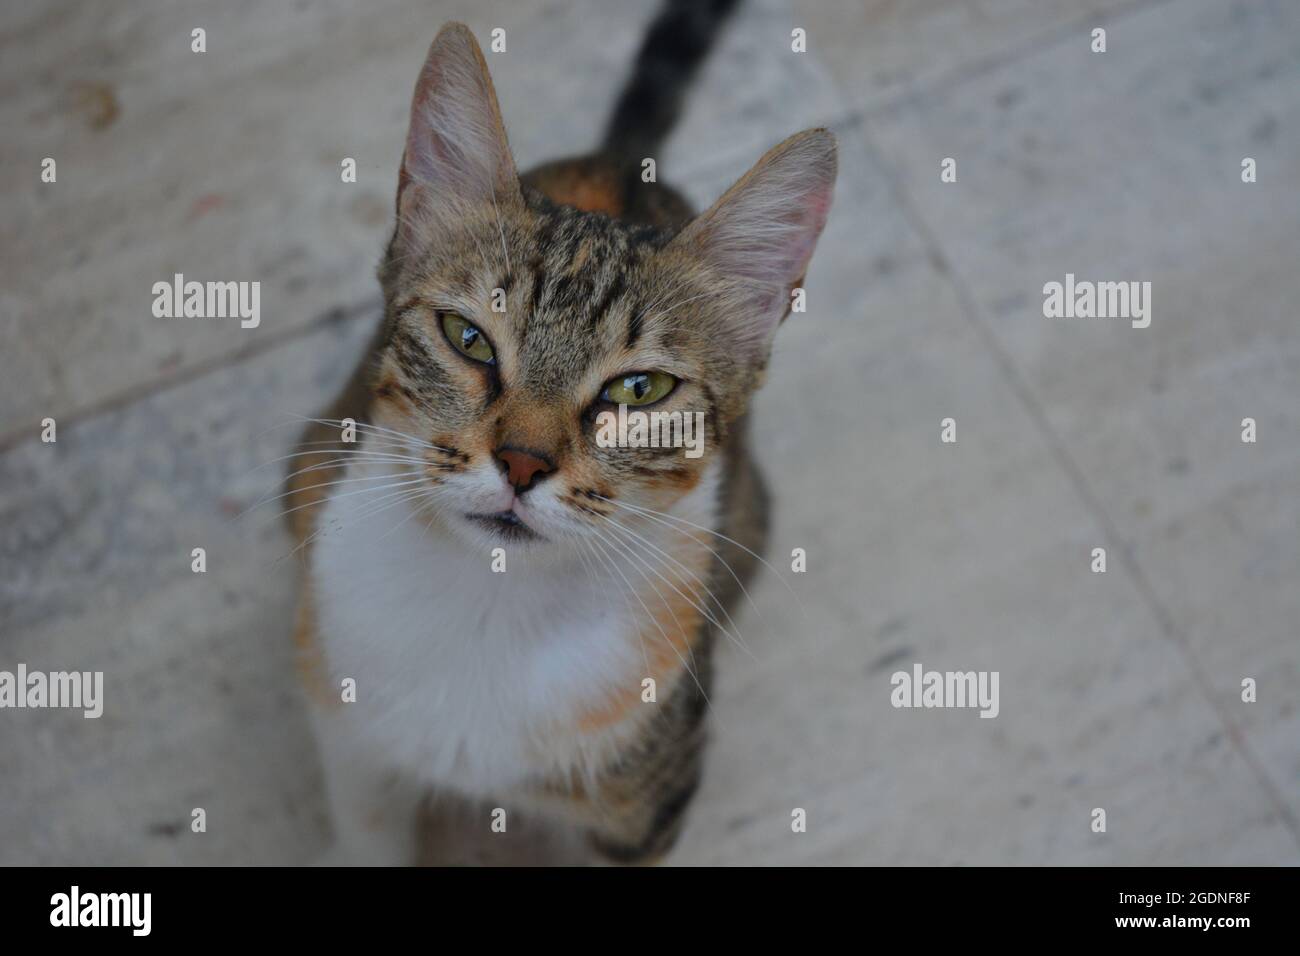 A cat is looking up at the camera. Stock Photo